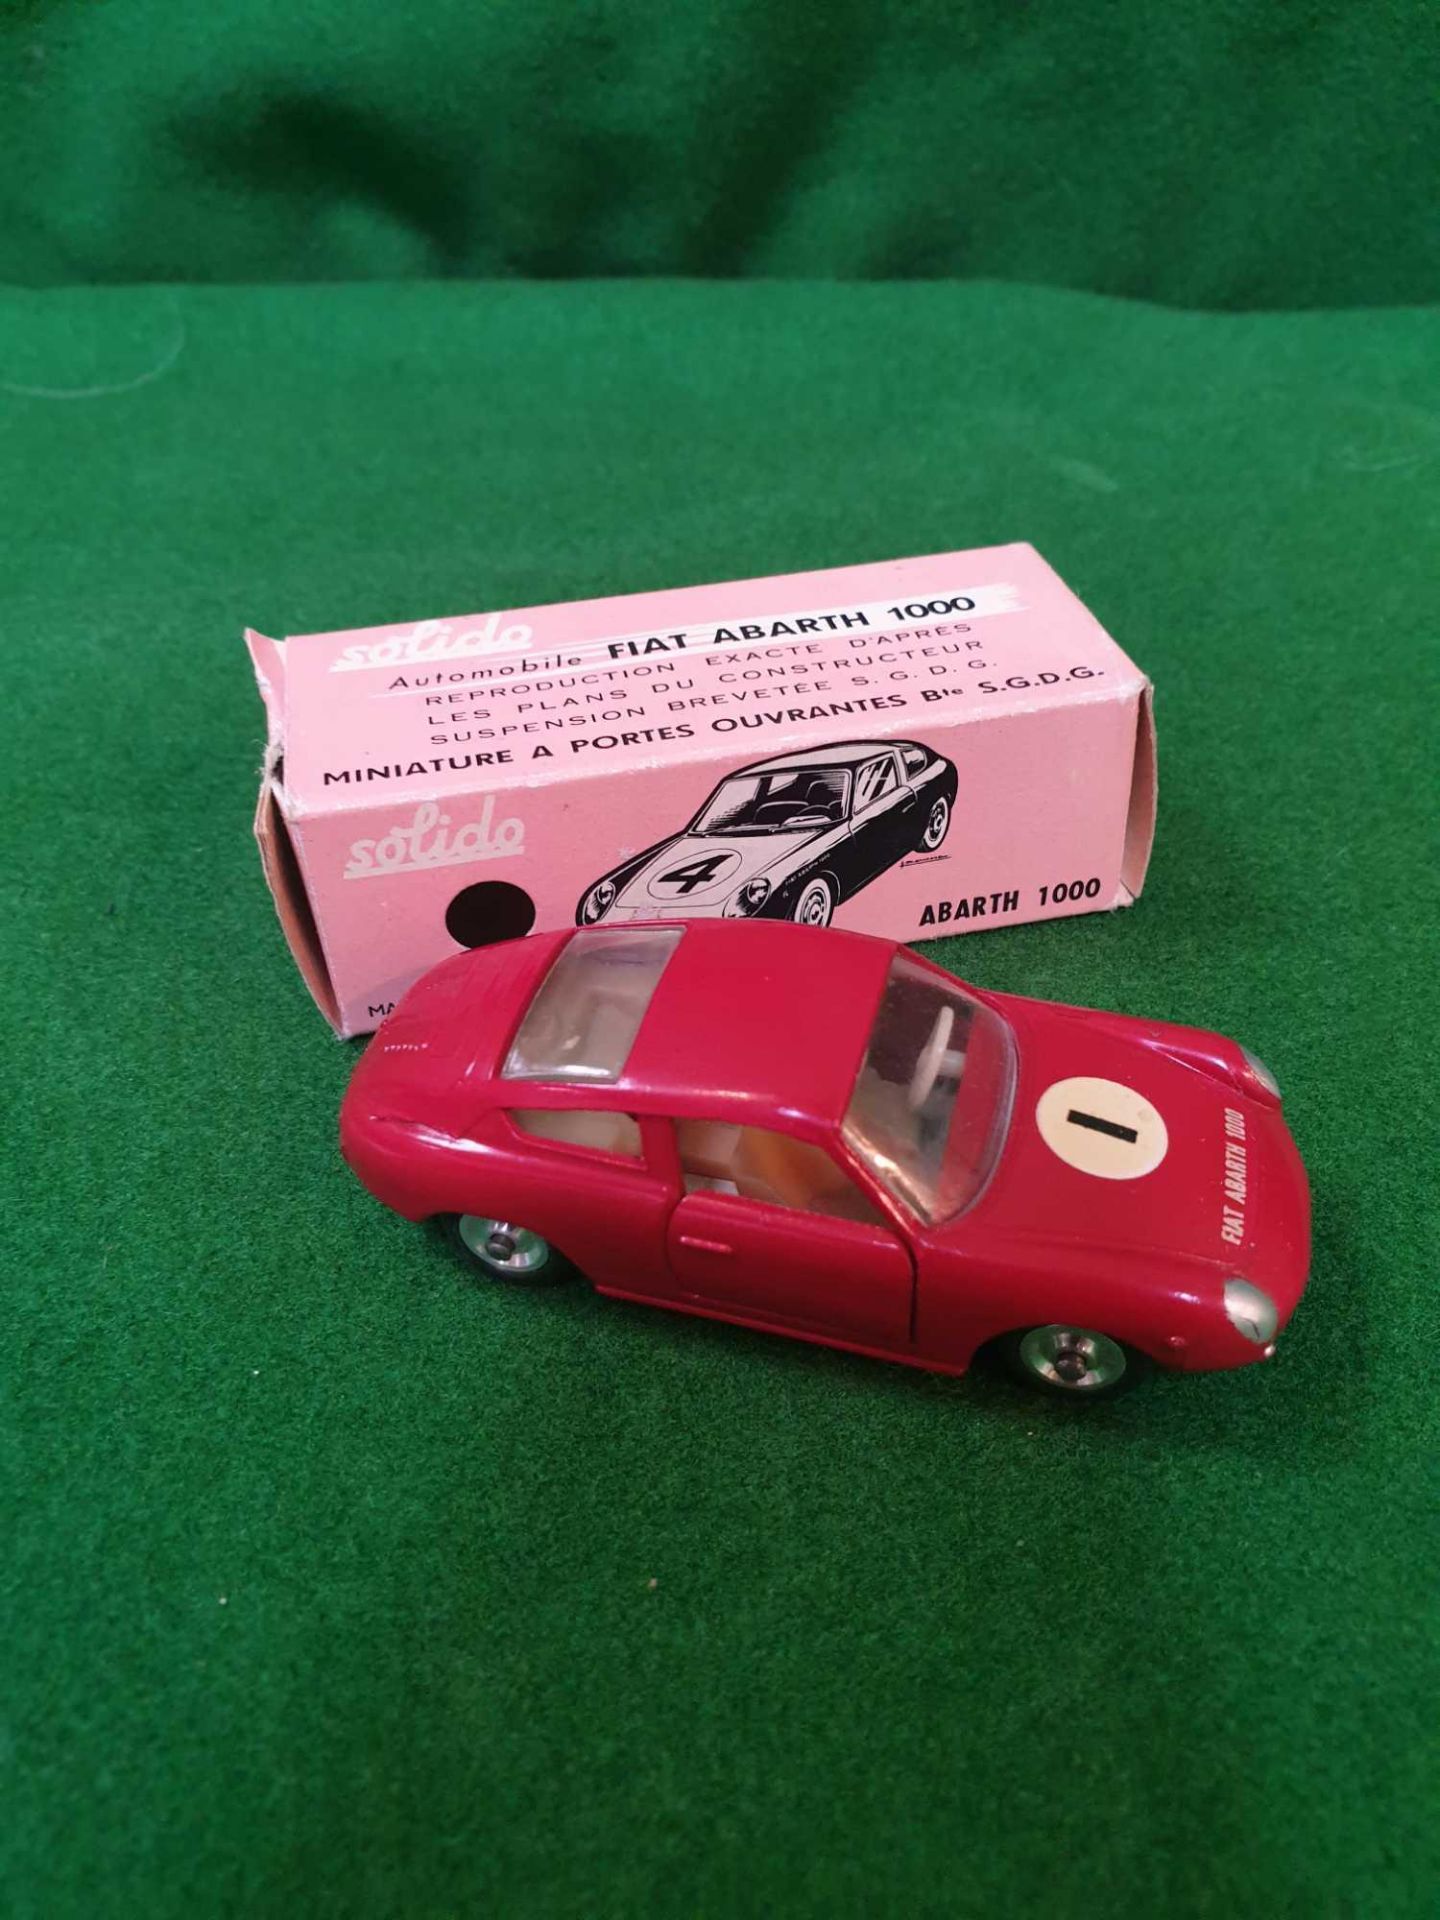 Solido #124 - Fiat Abarth 1000 - Red Racing No.1 Pink Box Mint Model In Excellent Box - Image 2 of 3